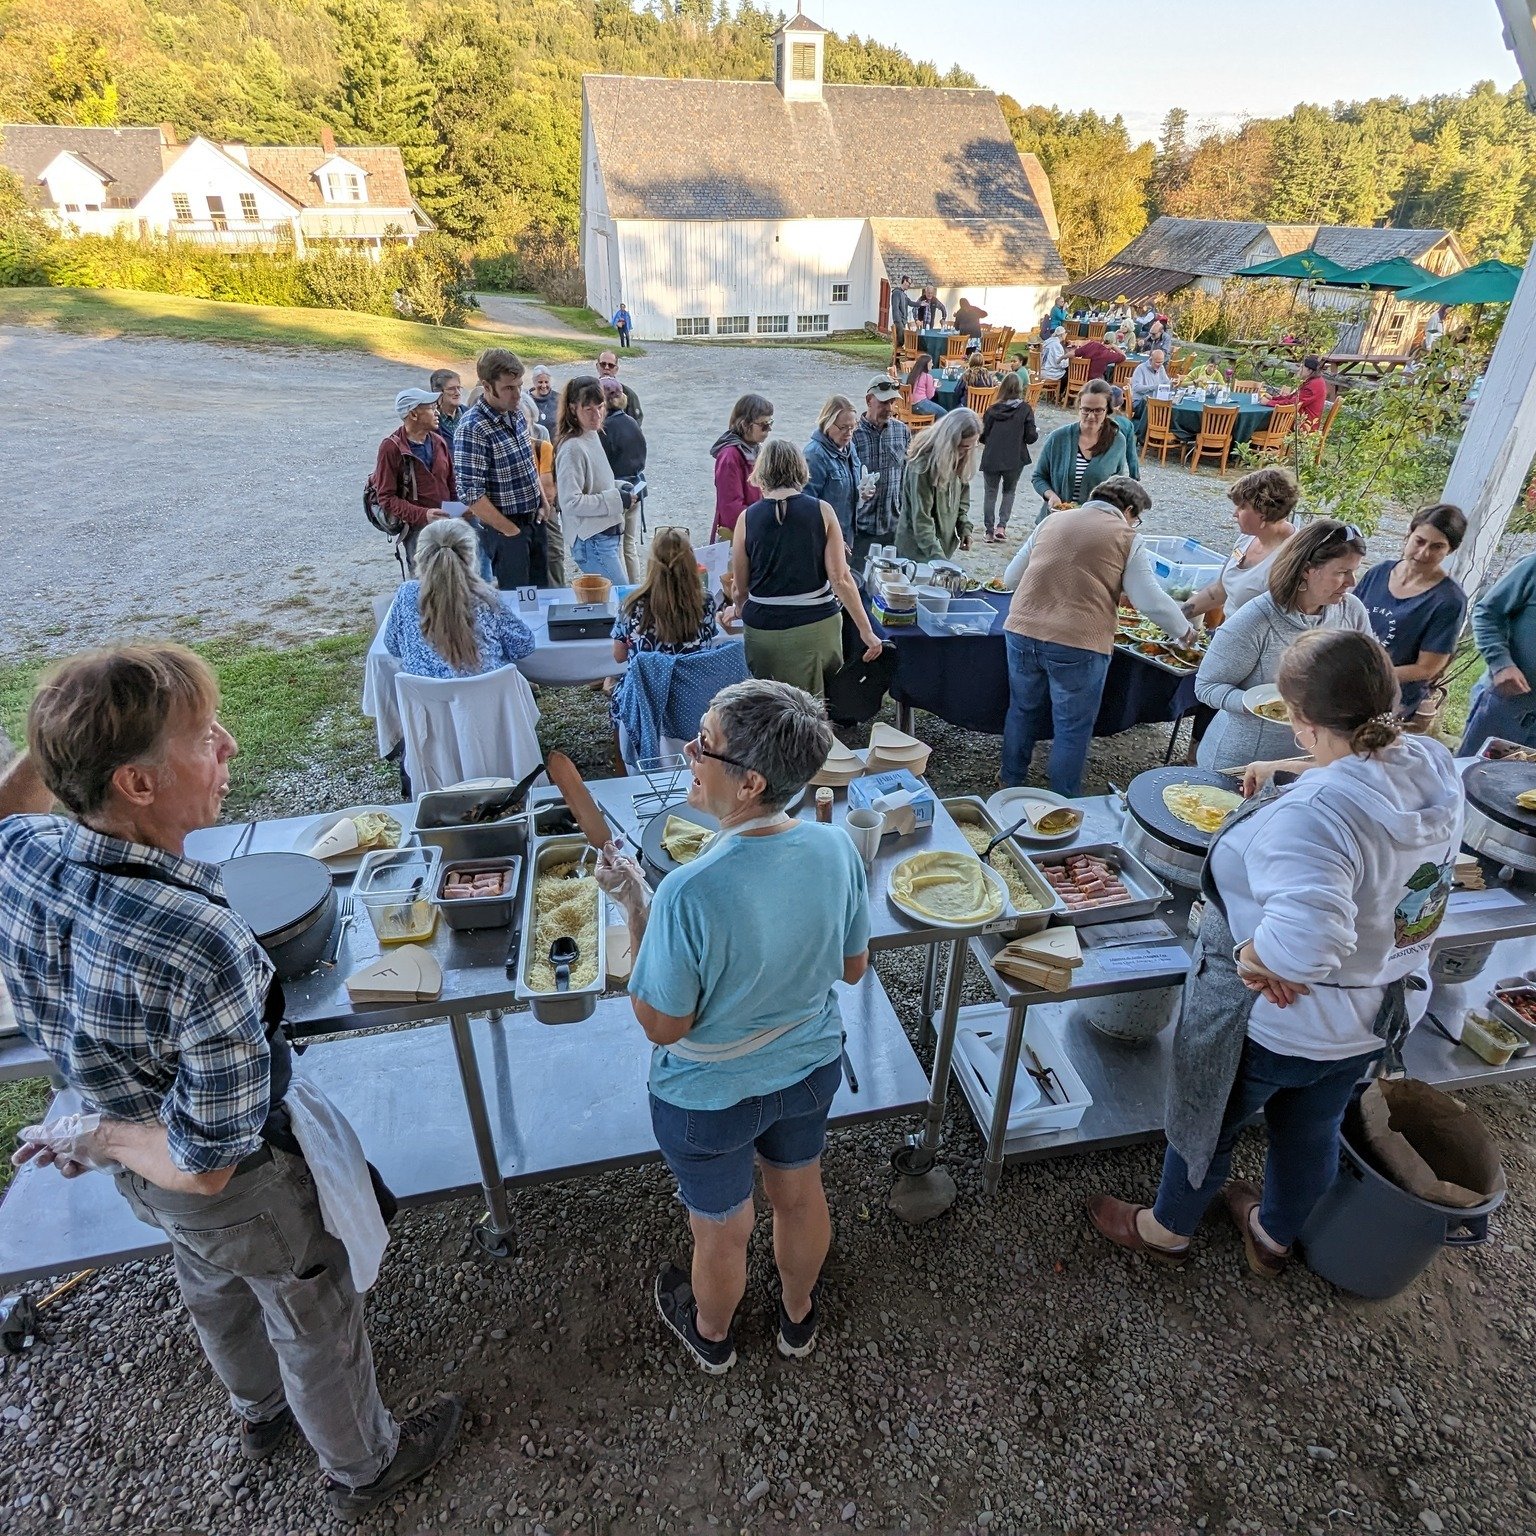 Cr&ecirc;pe Night tickets are now available! These seasonal monthly gatherings, held the second Wednesday of each month at Scott Farm from May 15 through September 11, are times to celebrate the harvest, good simple food, and community in a stunning 